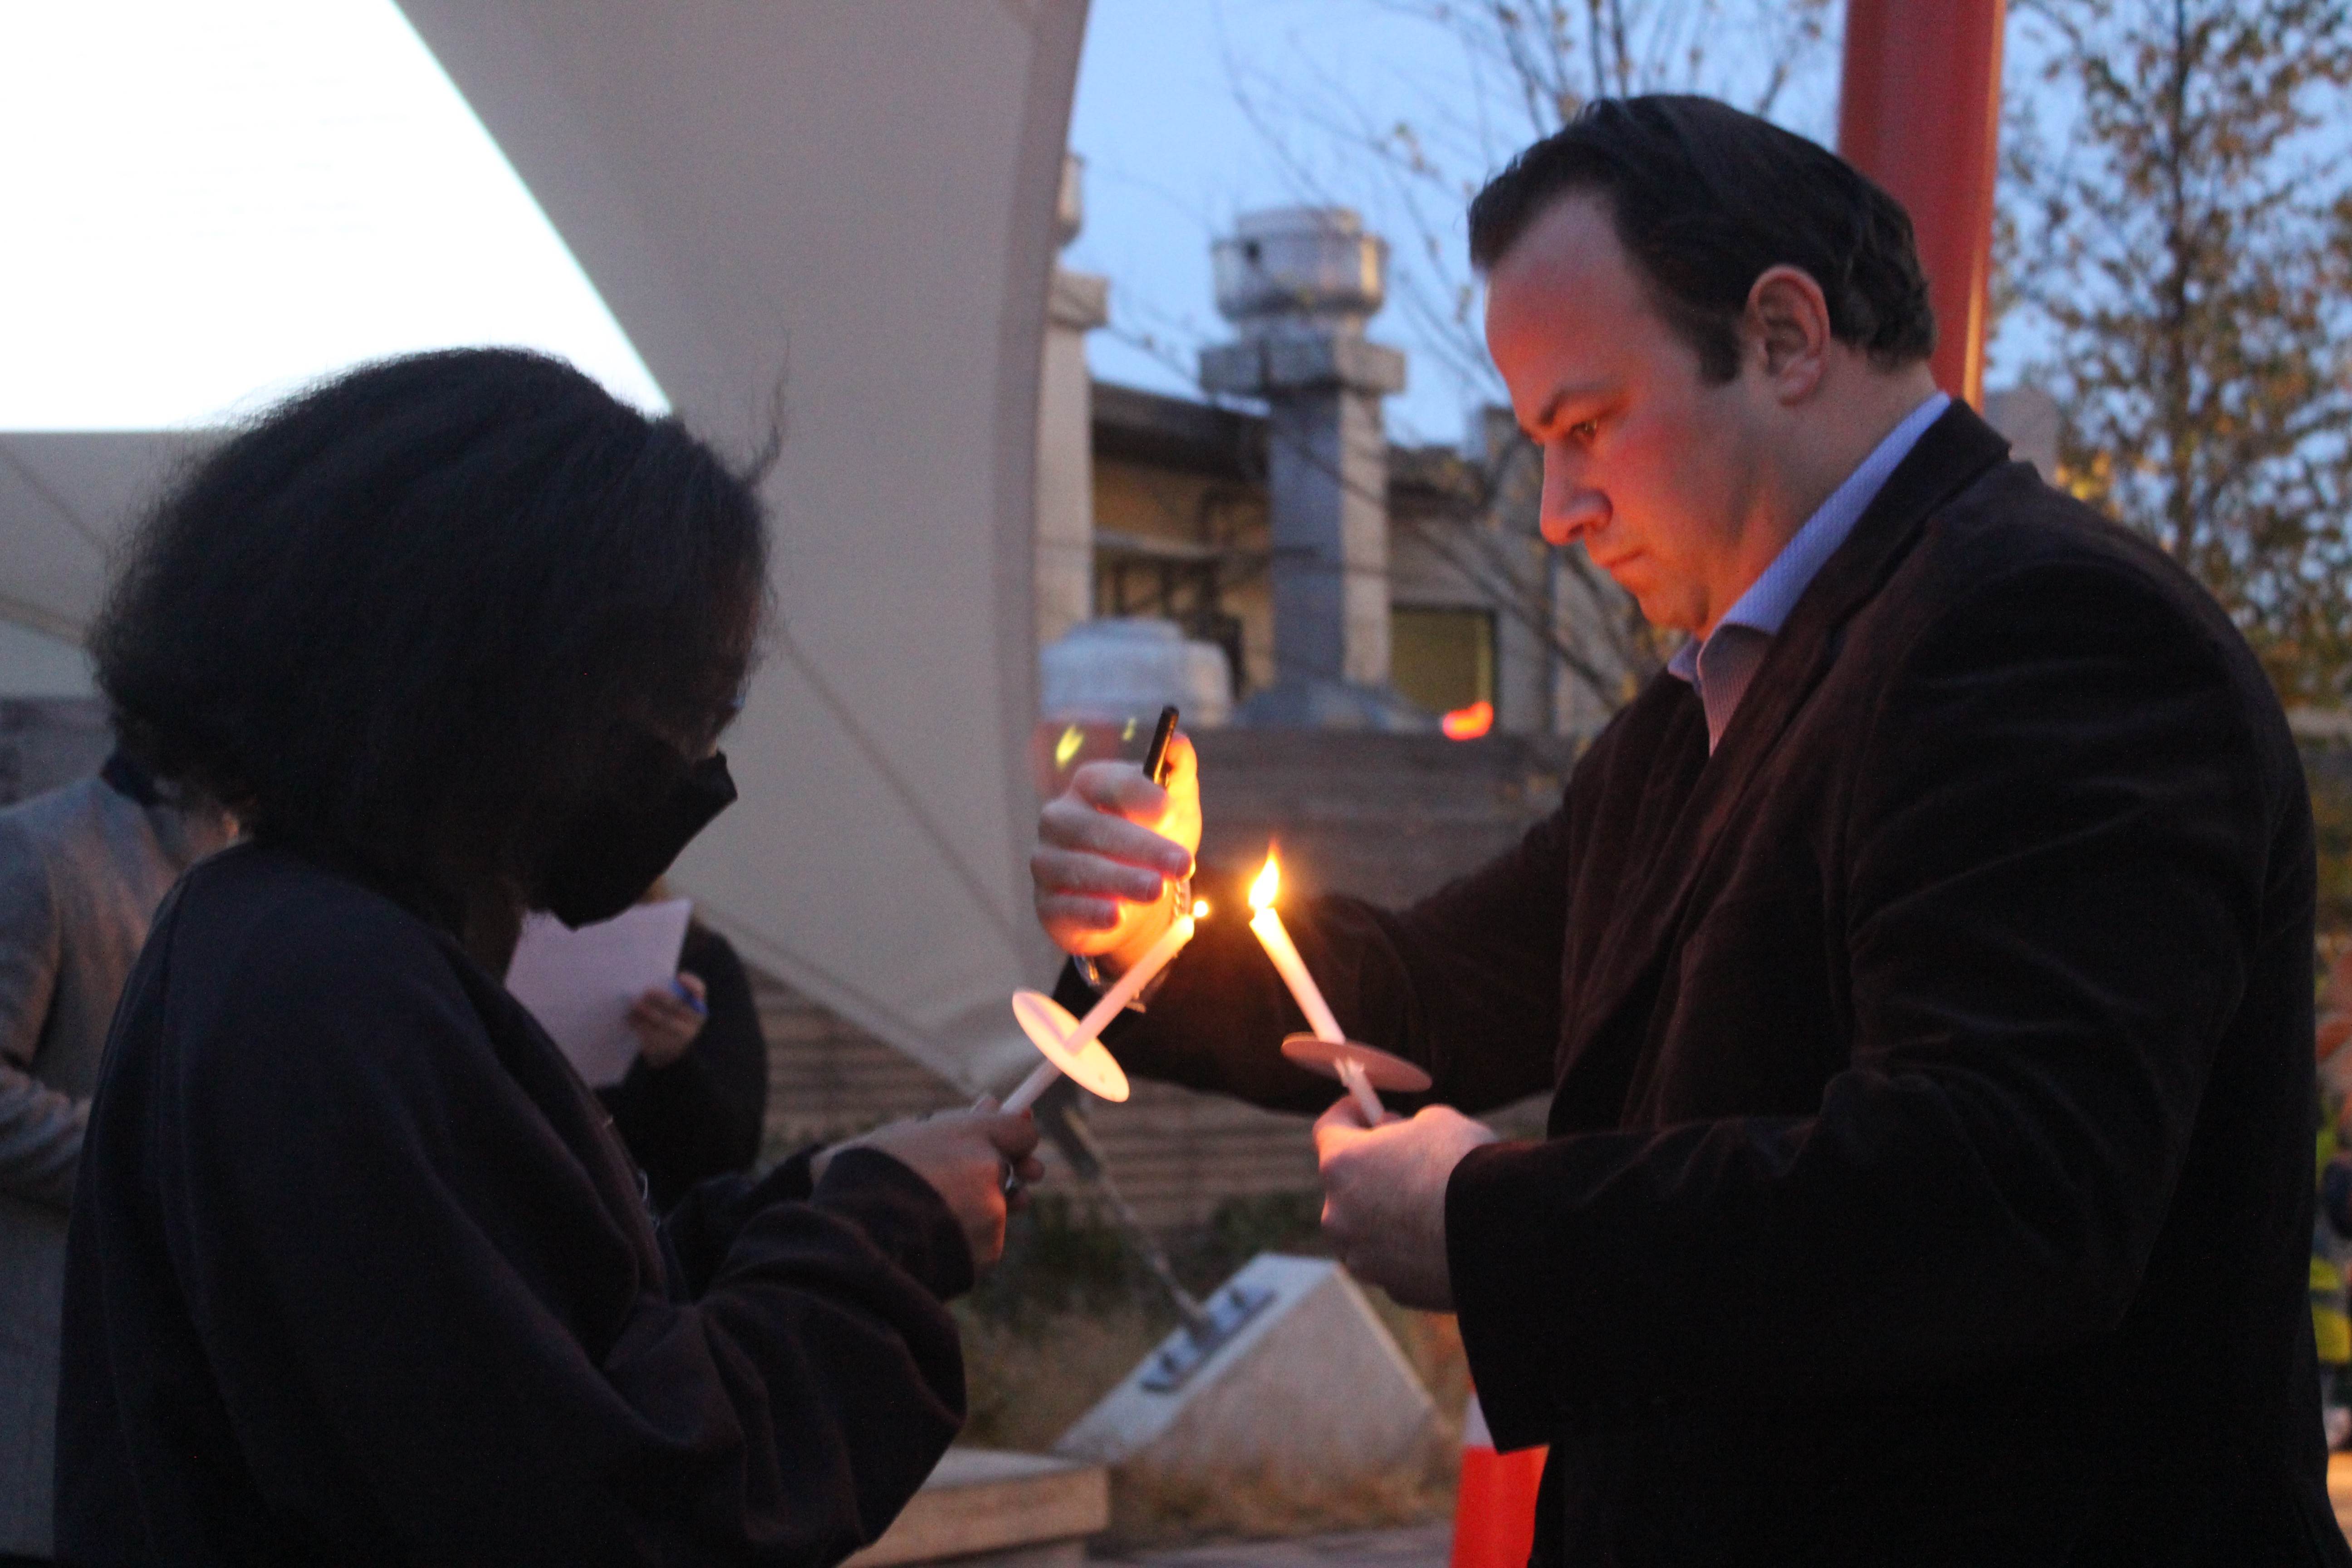 A woman holds a candle out for a man to lights another one from its flame.